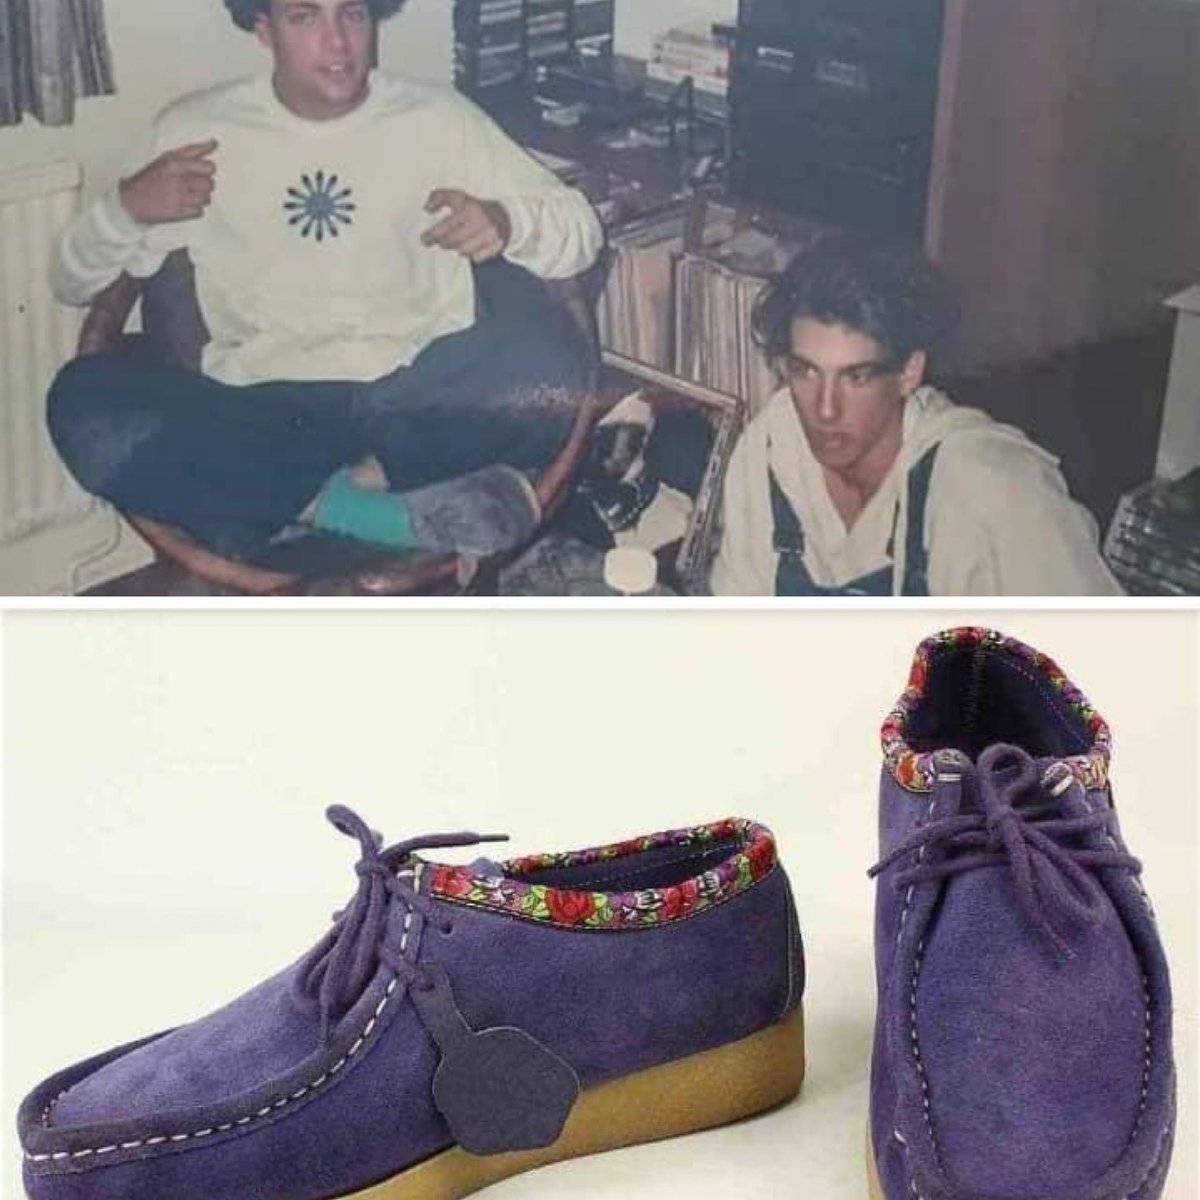 Throwing it back to 1989 style. #wallabees #1989 #casuals #89 #80s #tbt